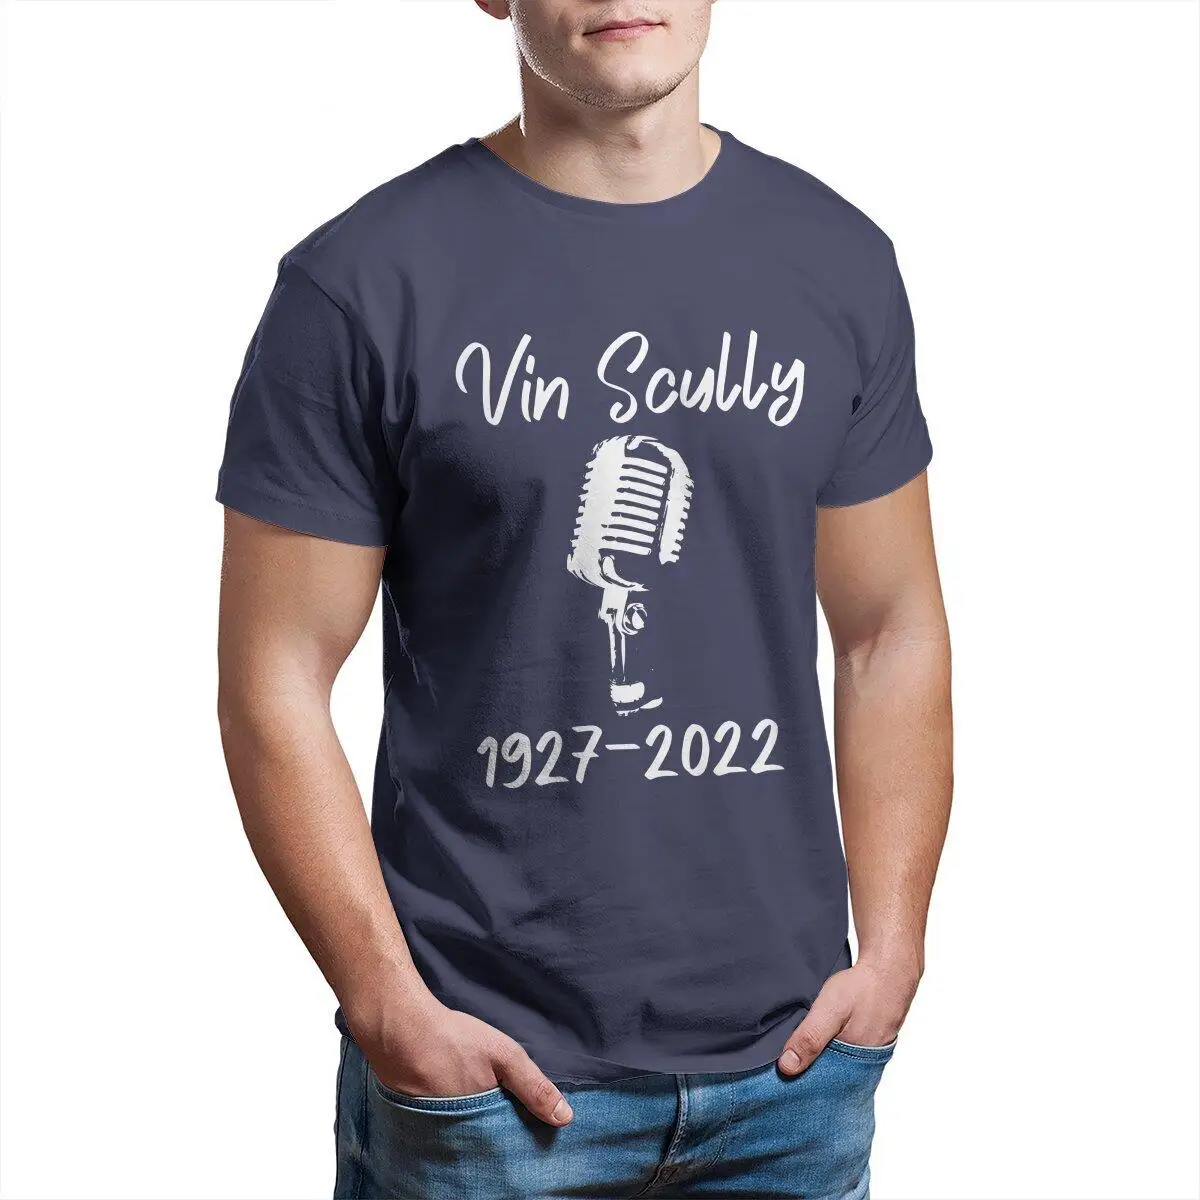 Novelty Vin Scully 1927-2022  T-Shirts Men Crew Neck Cotton T Shirts  Short Sleeve Tees Party Clothes